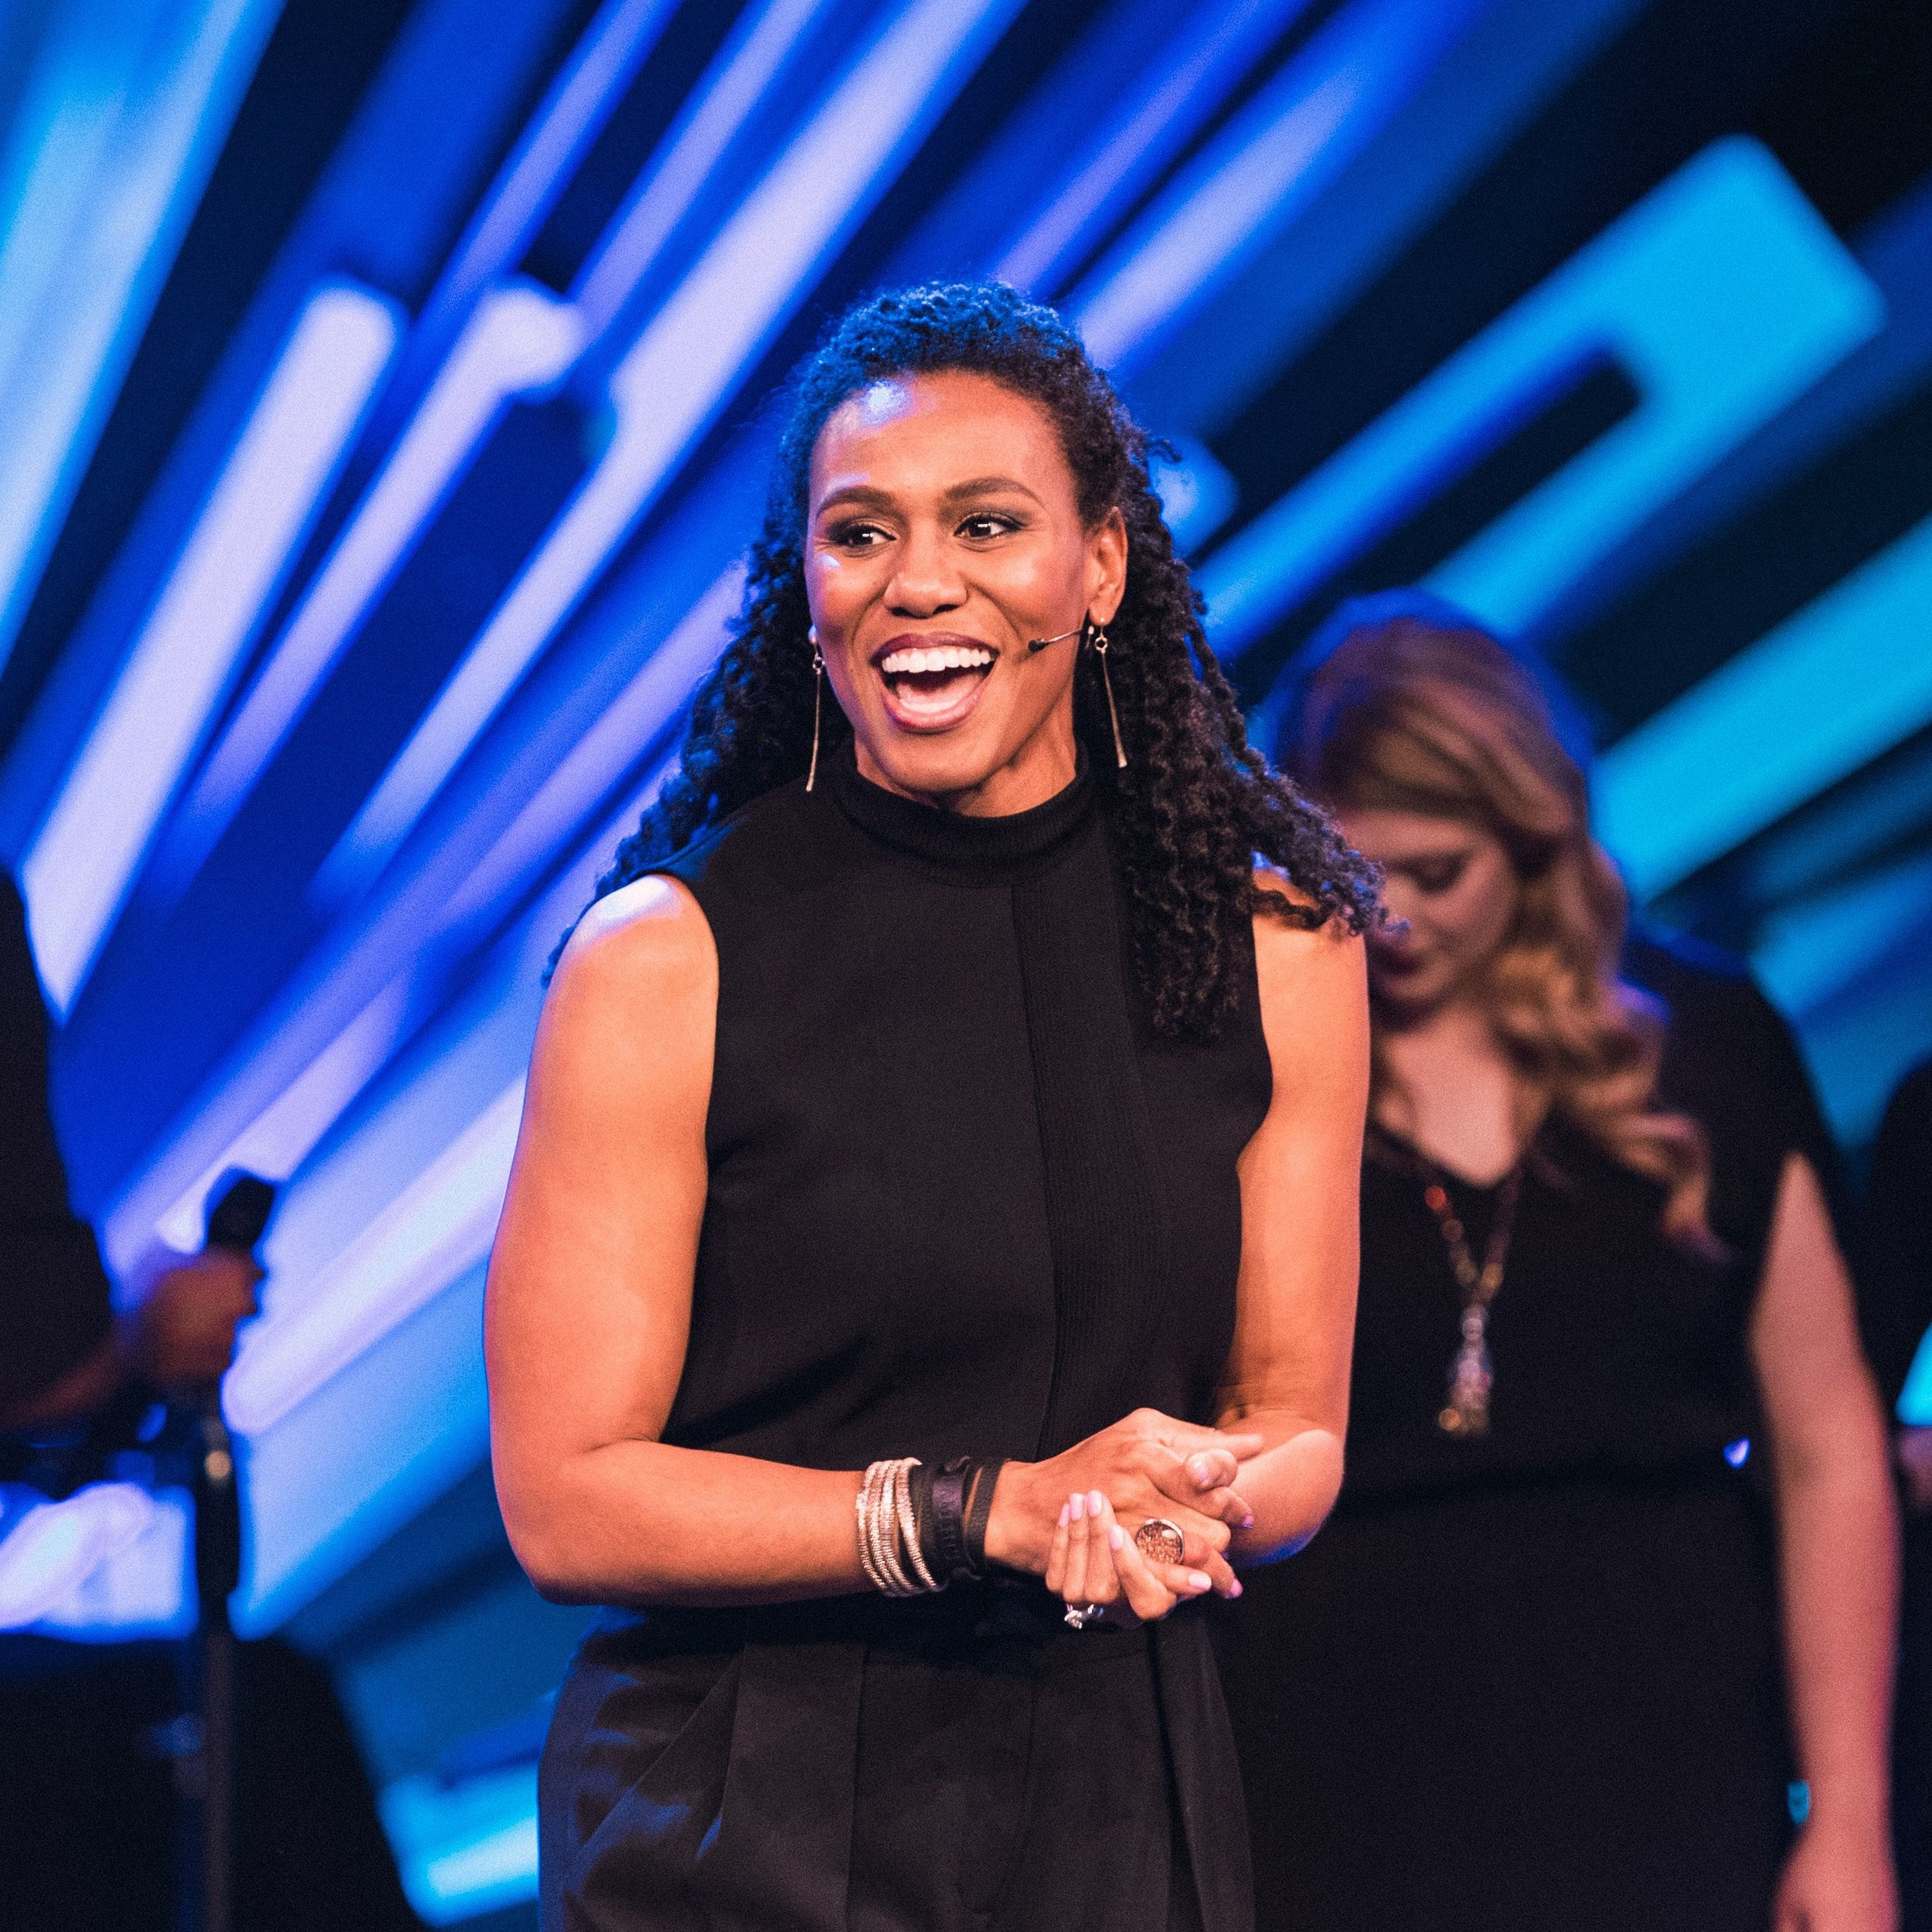 War Room Actor Priscilla Shirer tells Christian Women to find Value in